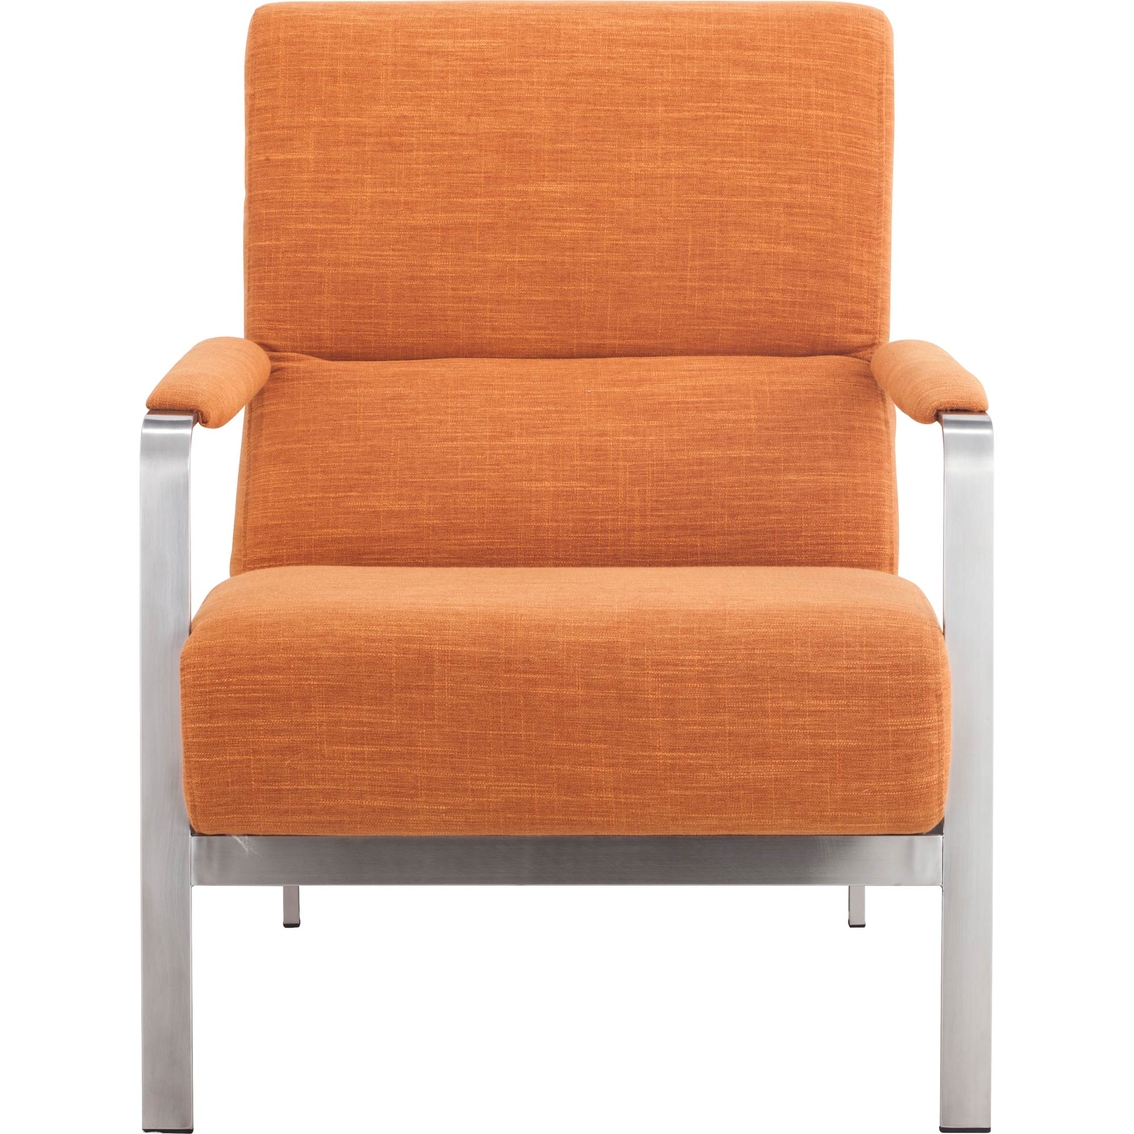 Zuo Jonkoping Arm Chair - Image 3 of 4